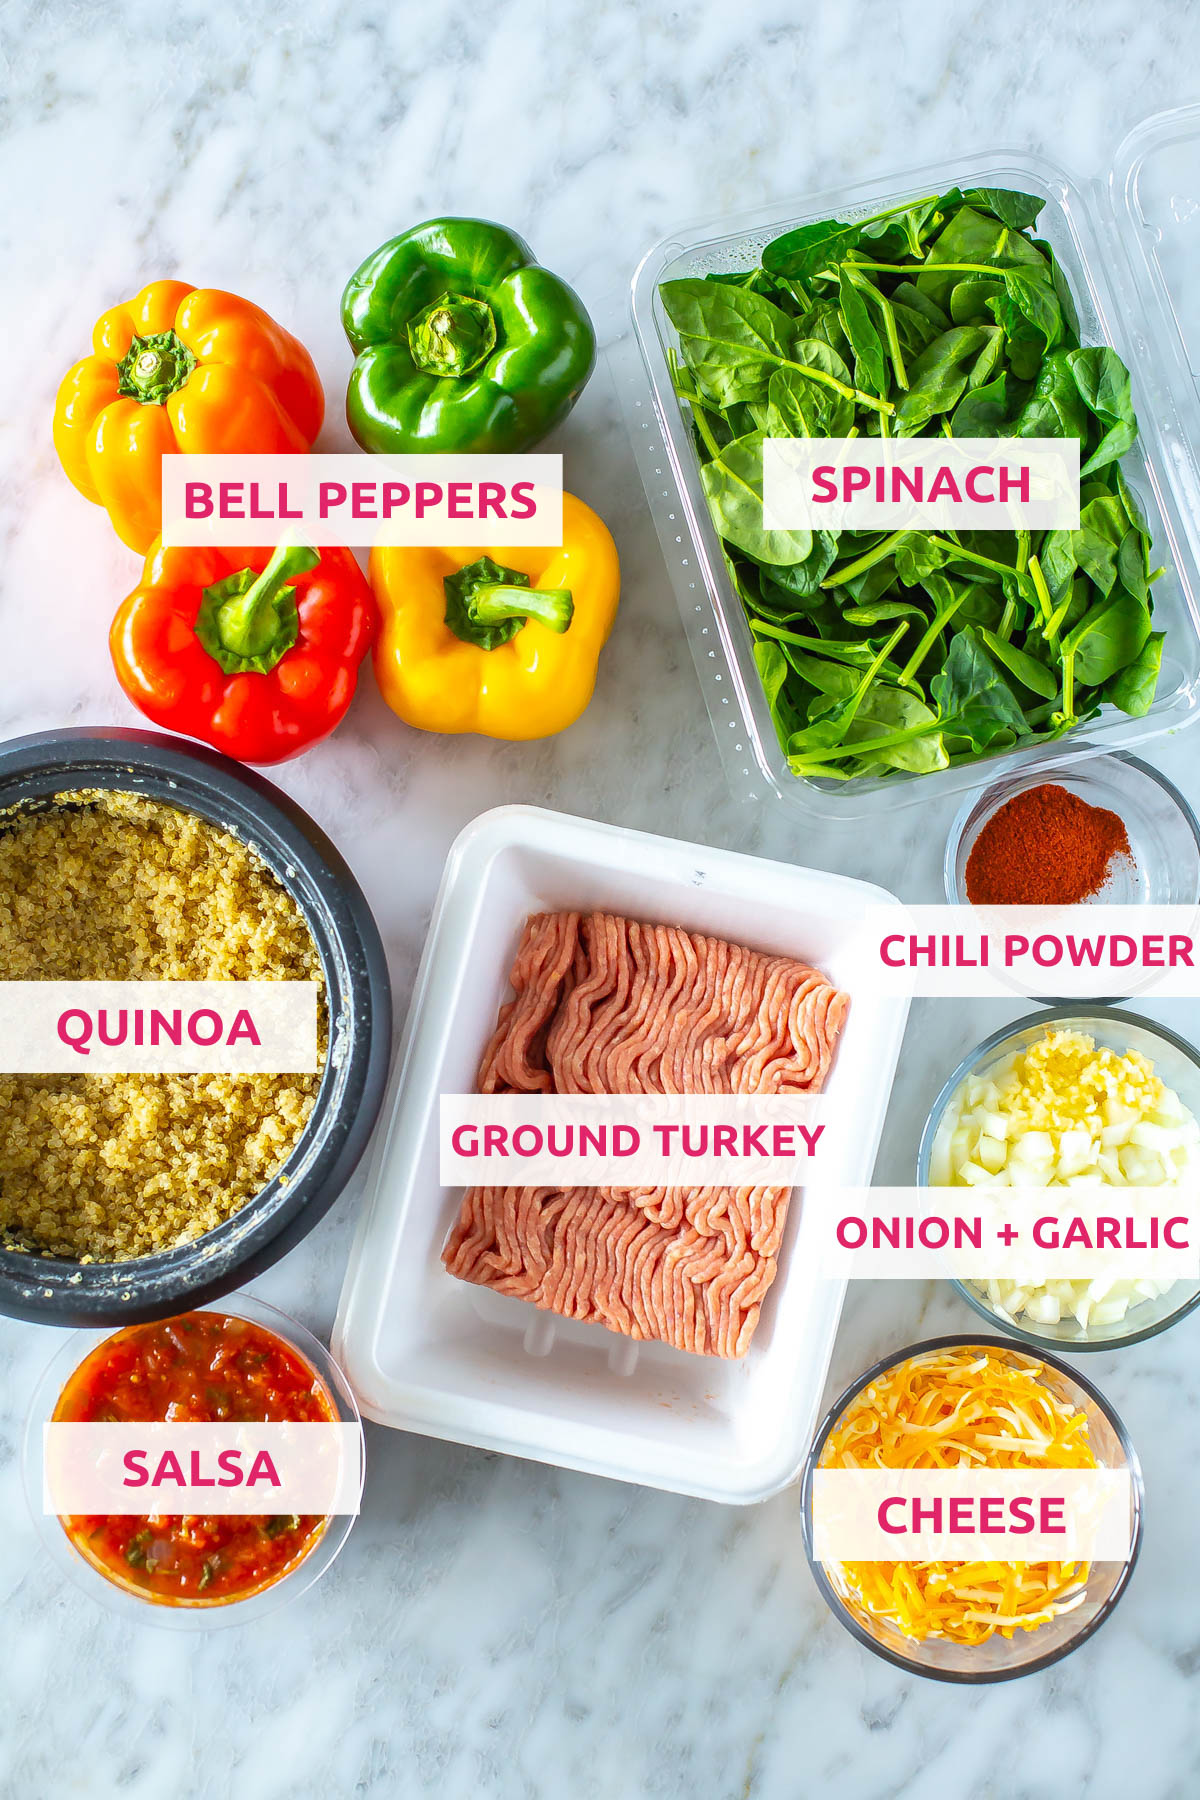 Ingredients for air fryer stuffed peppers: quinoa, bell peppers, spinach, chili powder, ground turkey, onion, garlic, cheese and salsa.